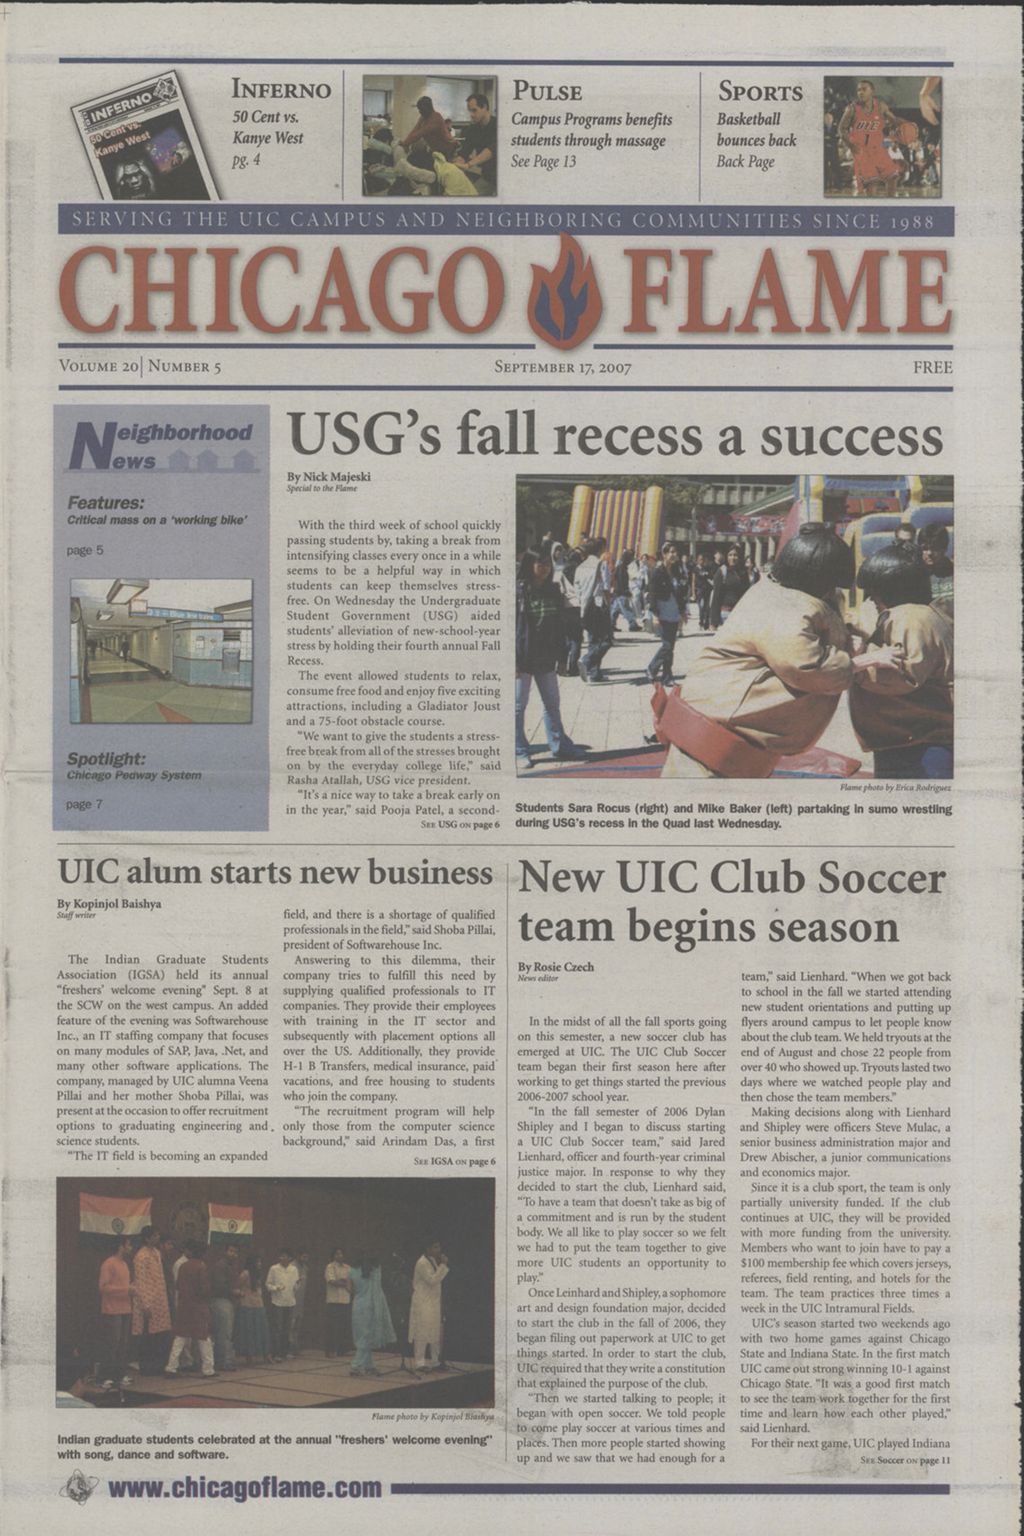 Miniature of Chicago Flame (September 17, 2007)